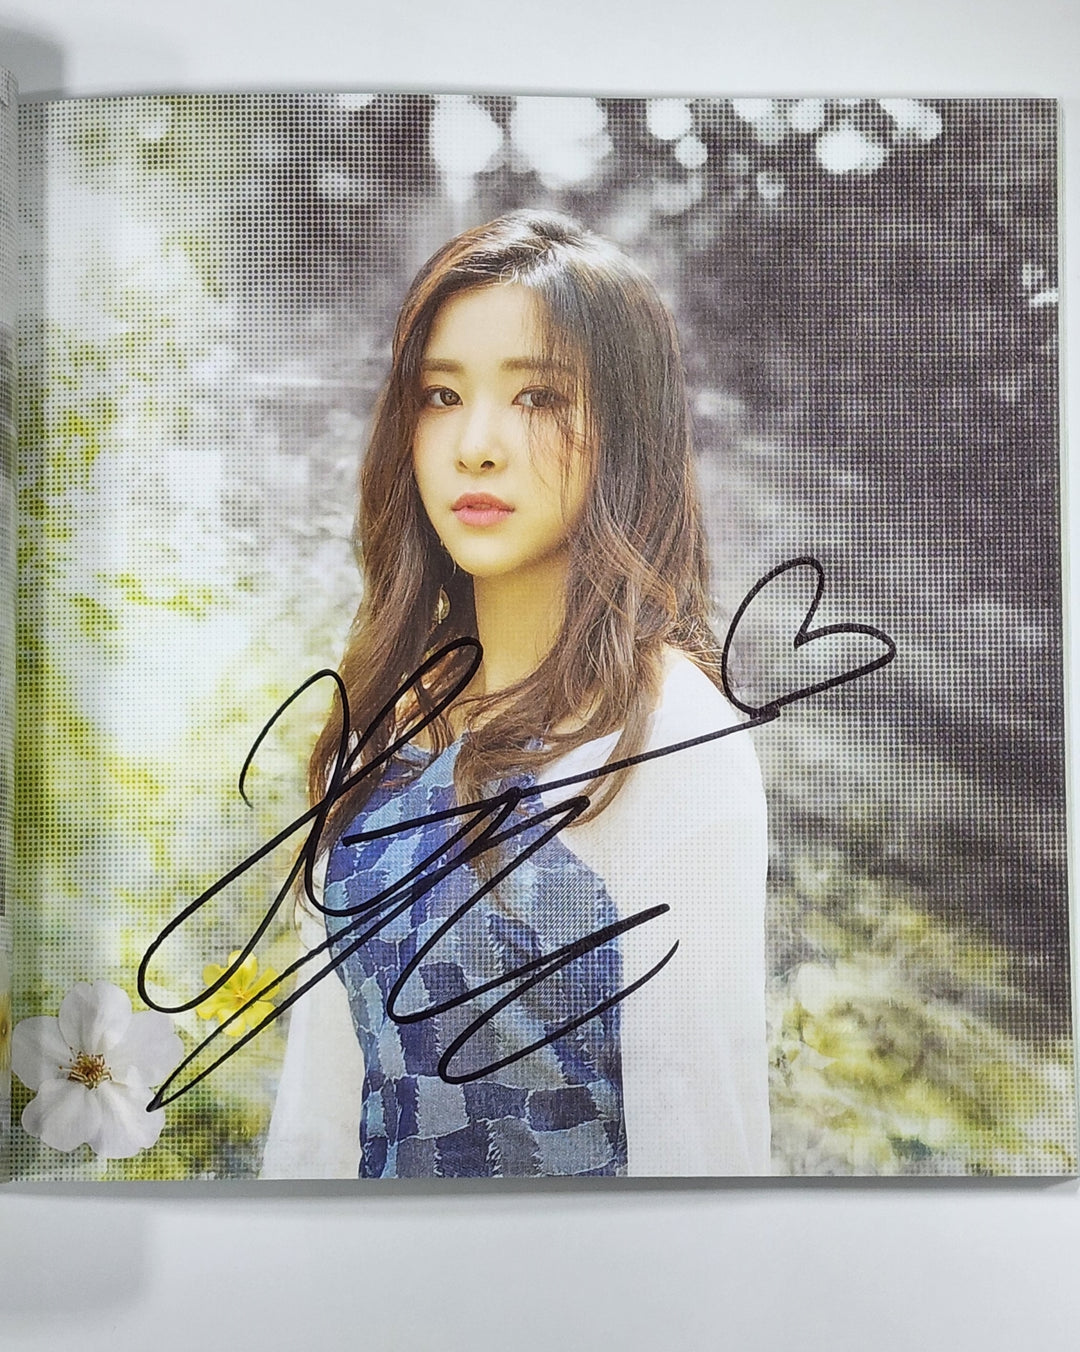 NATURE "NATURE WORLD : CODE W" - Hand Autographed(Signed) Album